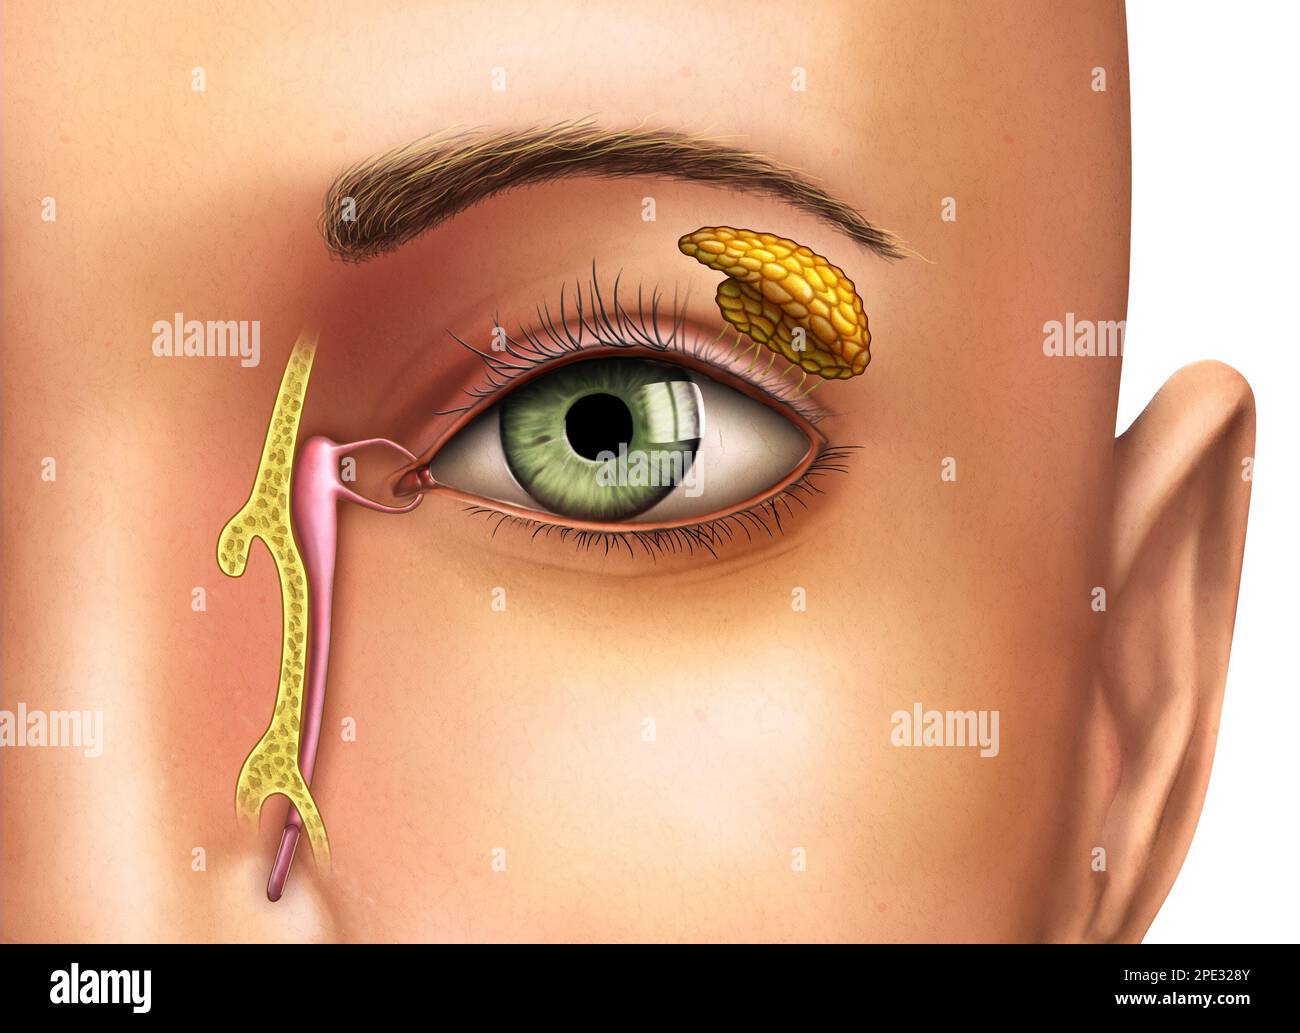 Anatomy drawing showing the functioning of lacrimal glands. Digital illustration. Stock Photo